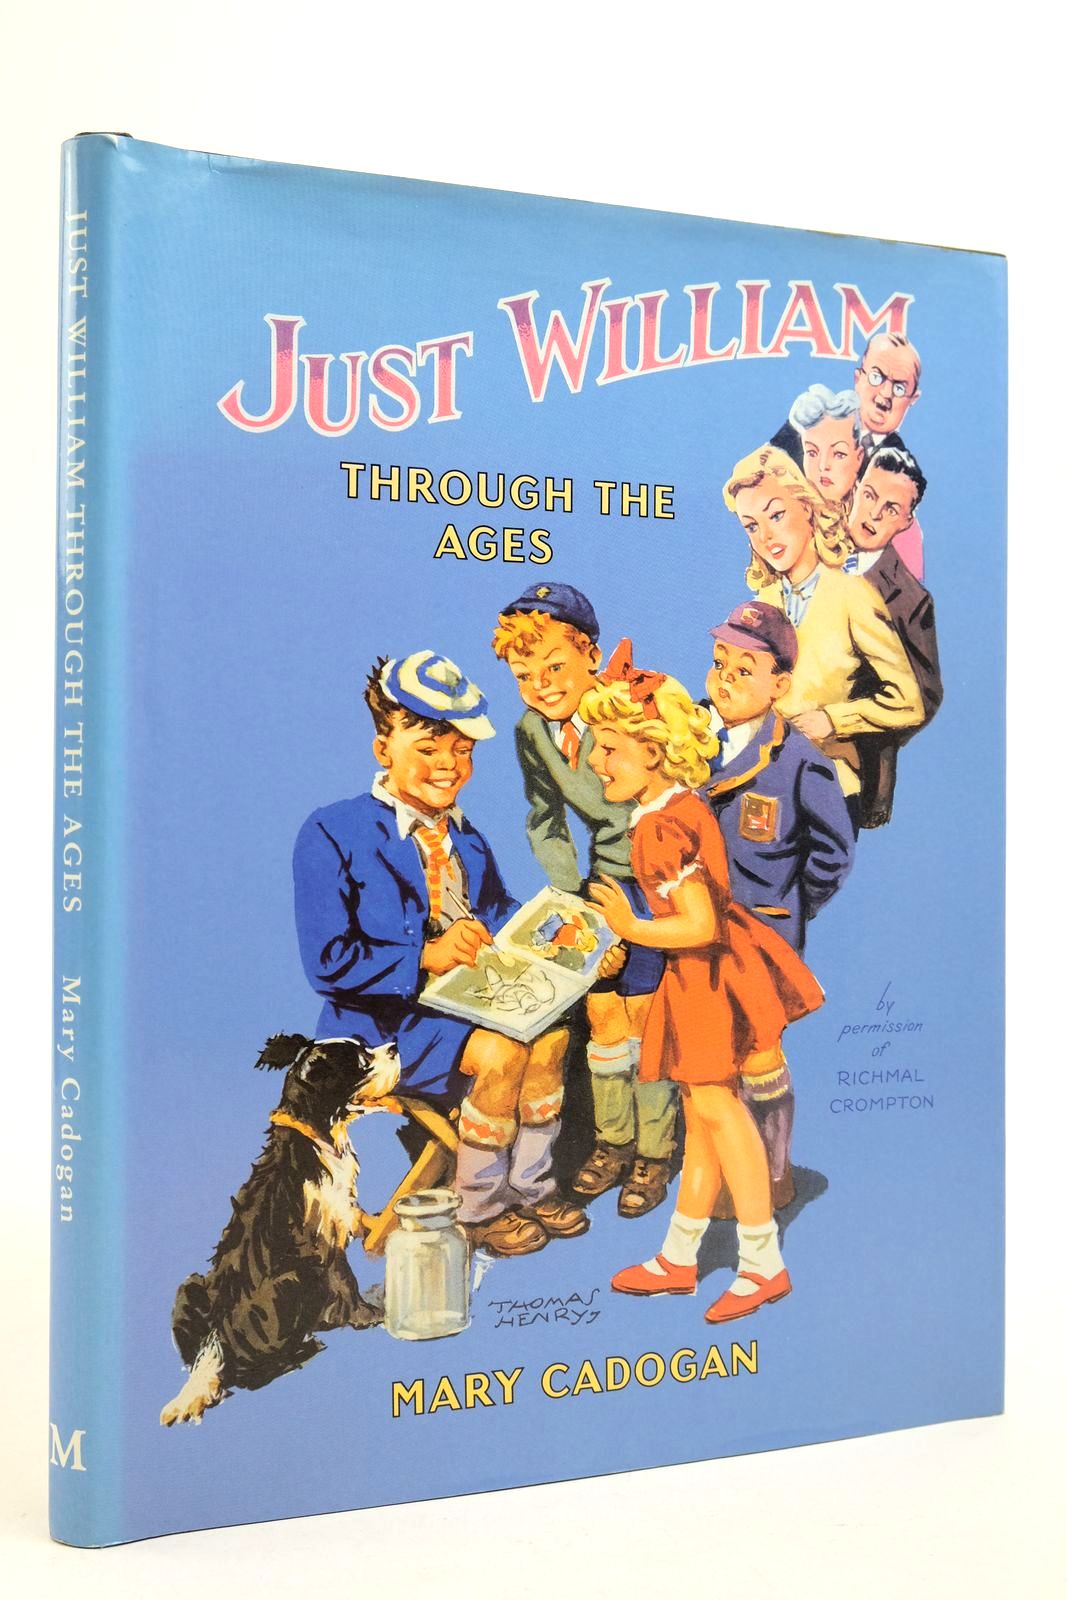 Photo of JUST WILLIAM THROUGH THE AGES written by Crompton, Richmal Cadogan, Mary illustrated by Henry, Thomas published by Macmillan &amp; Co. Ltd. (STOCK CODE: 2140635)  for sale by Stella & Rose's Books